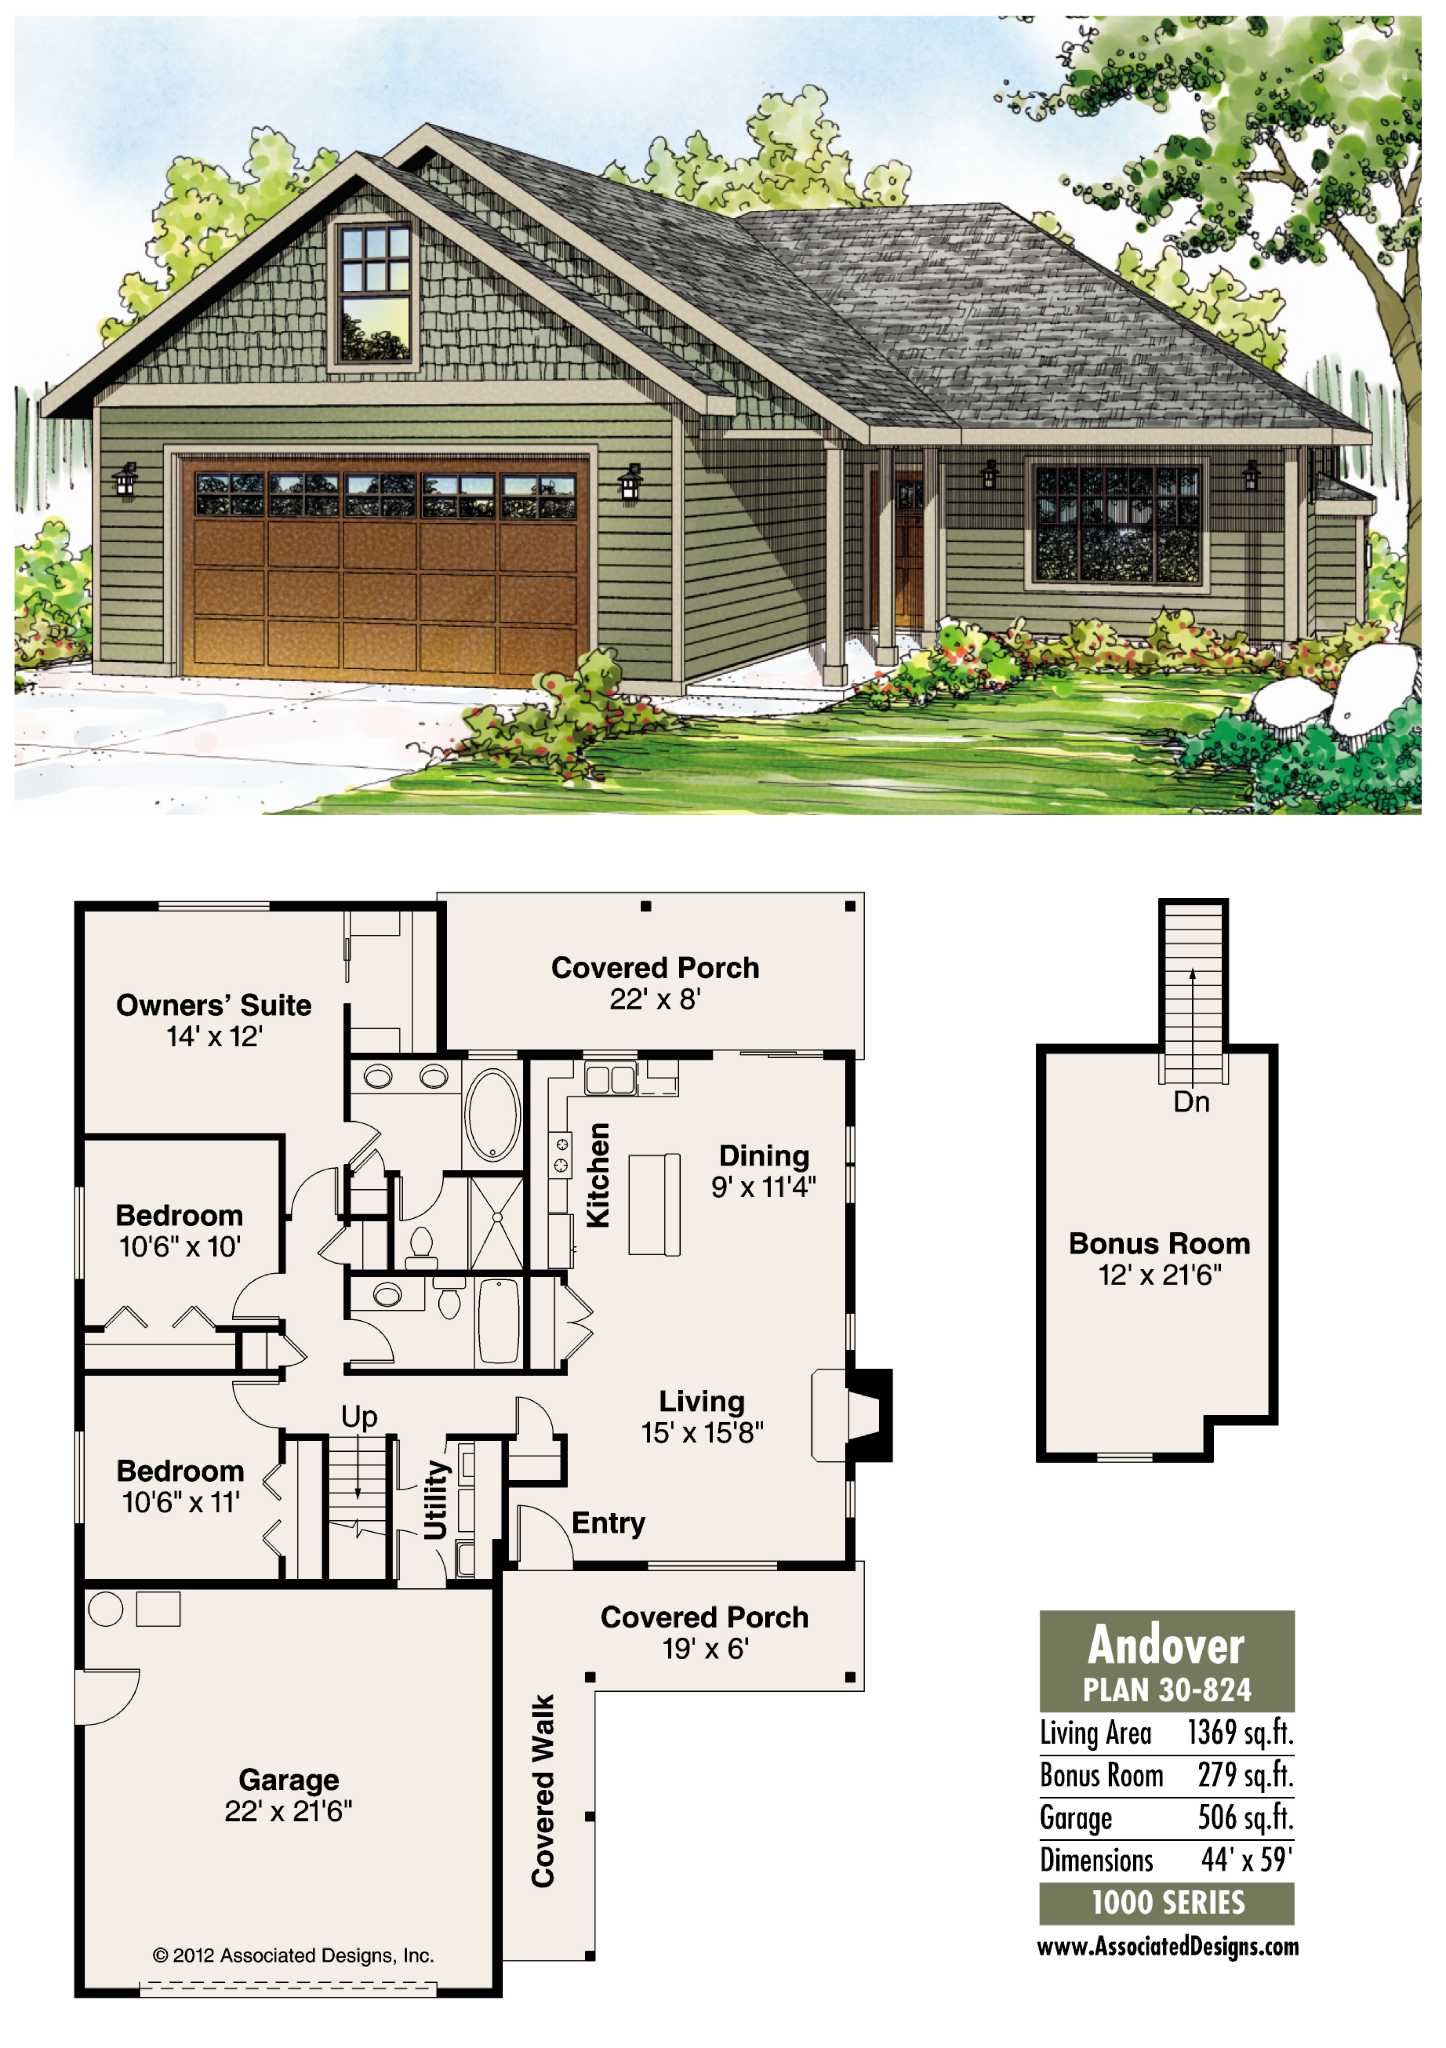 Pdf House Plans With Dimensions 25x40 House Plan Free Download In Pdf ...